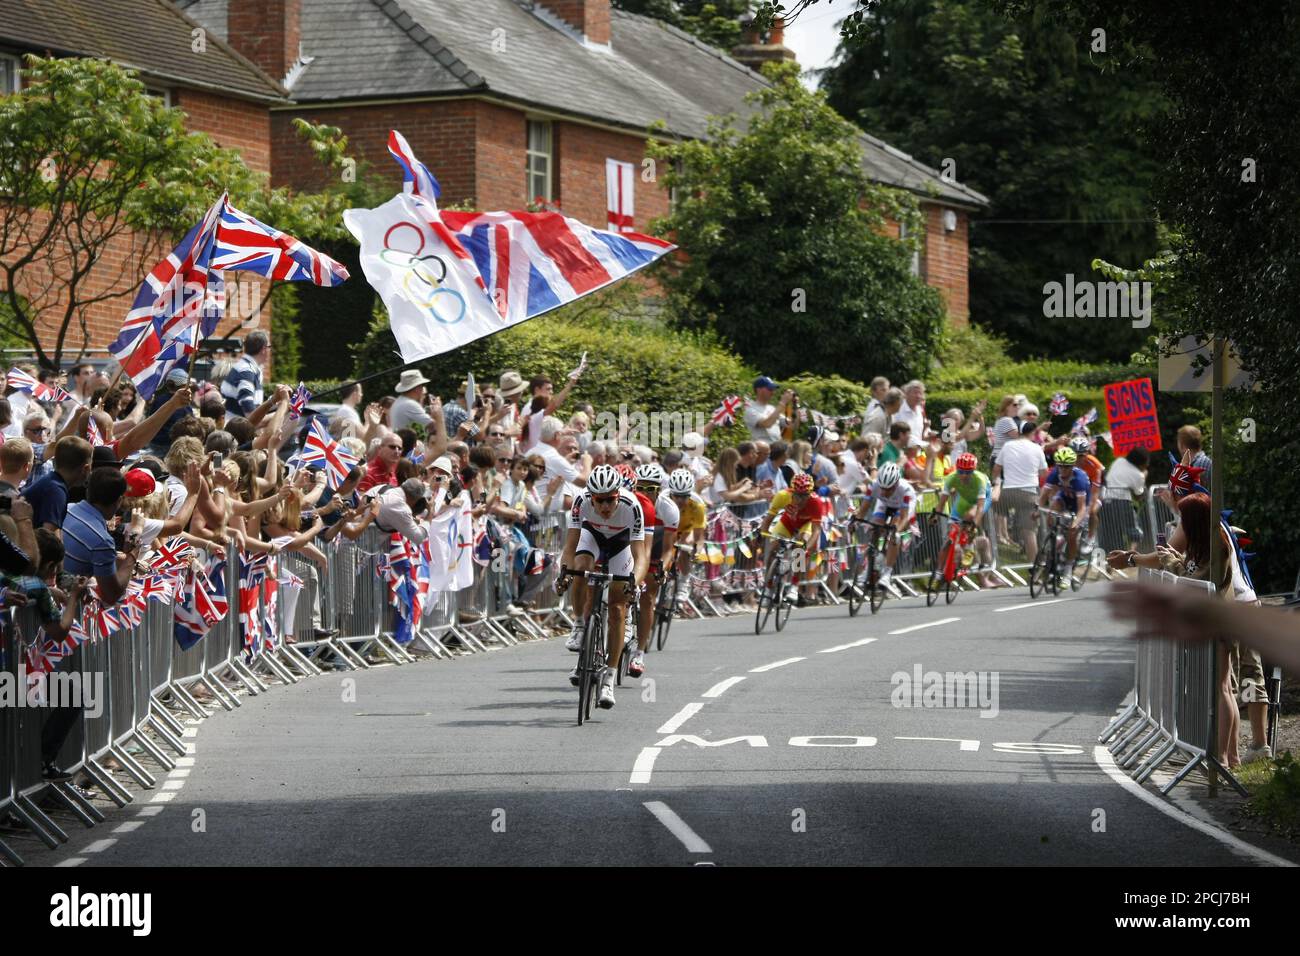 August 2012 Headley, Surrey, UK  The Olympic Cycle race peloton rides through a fervently patriotic crowd in the village of Headley. Stock Photo